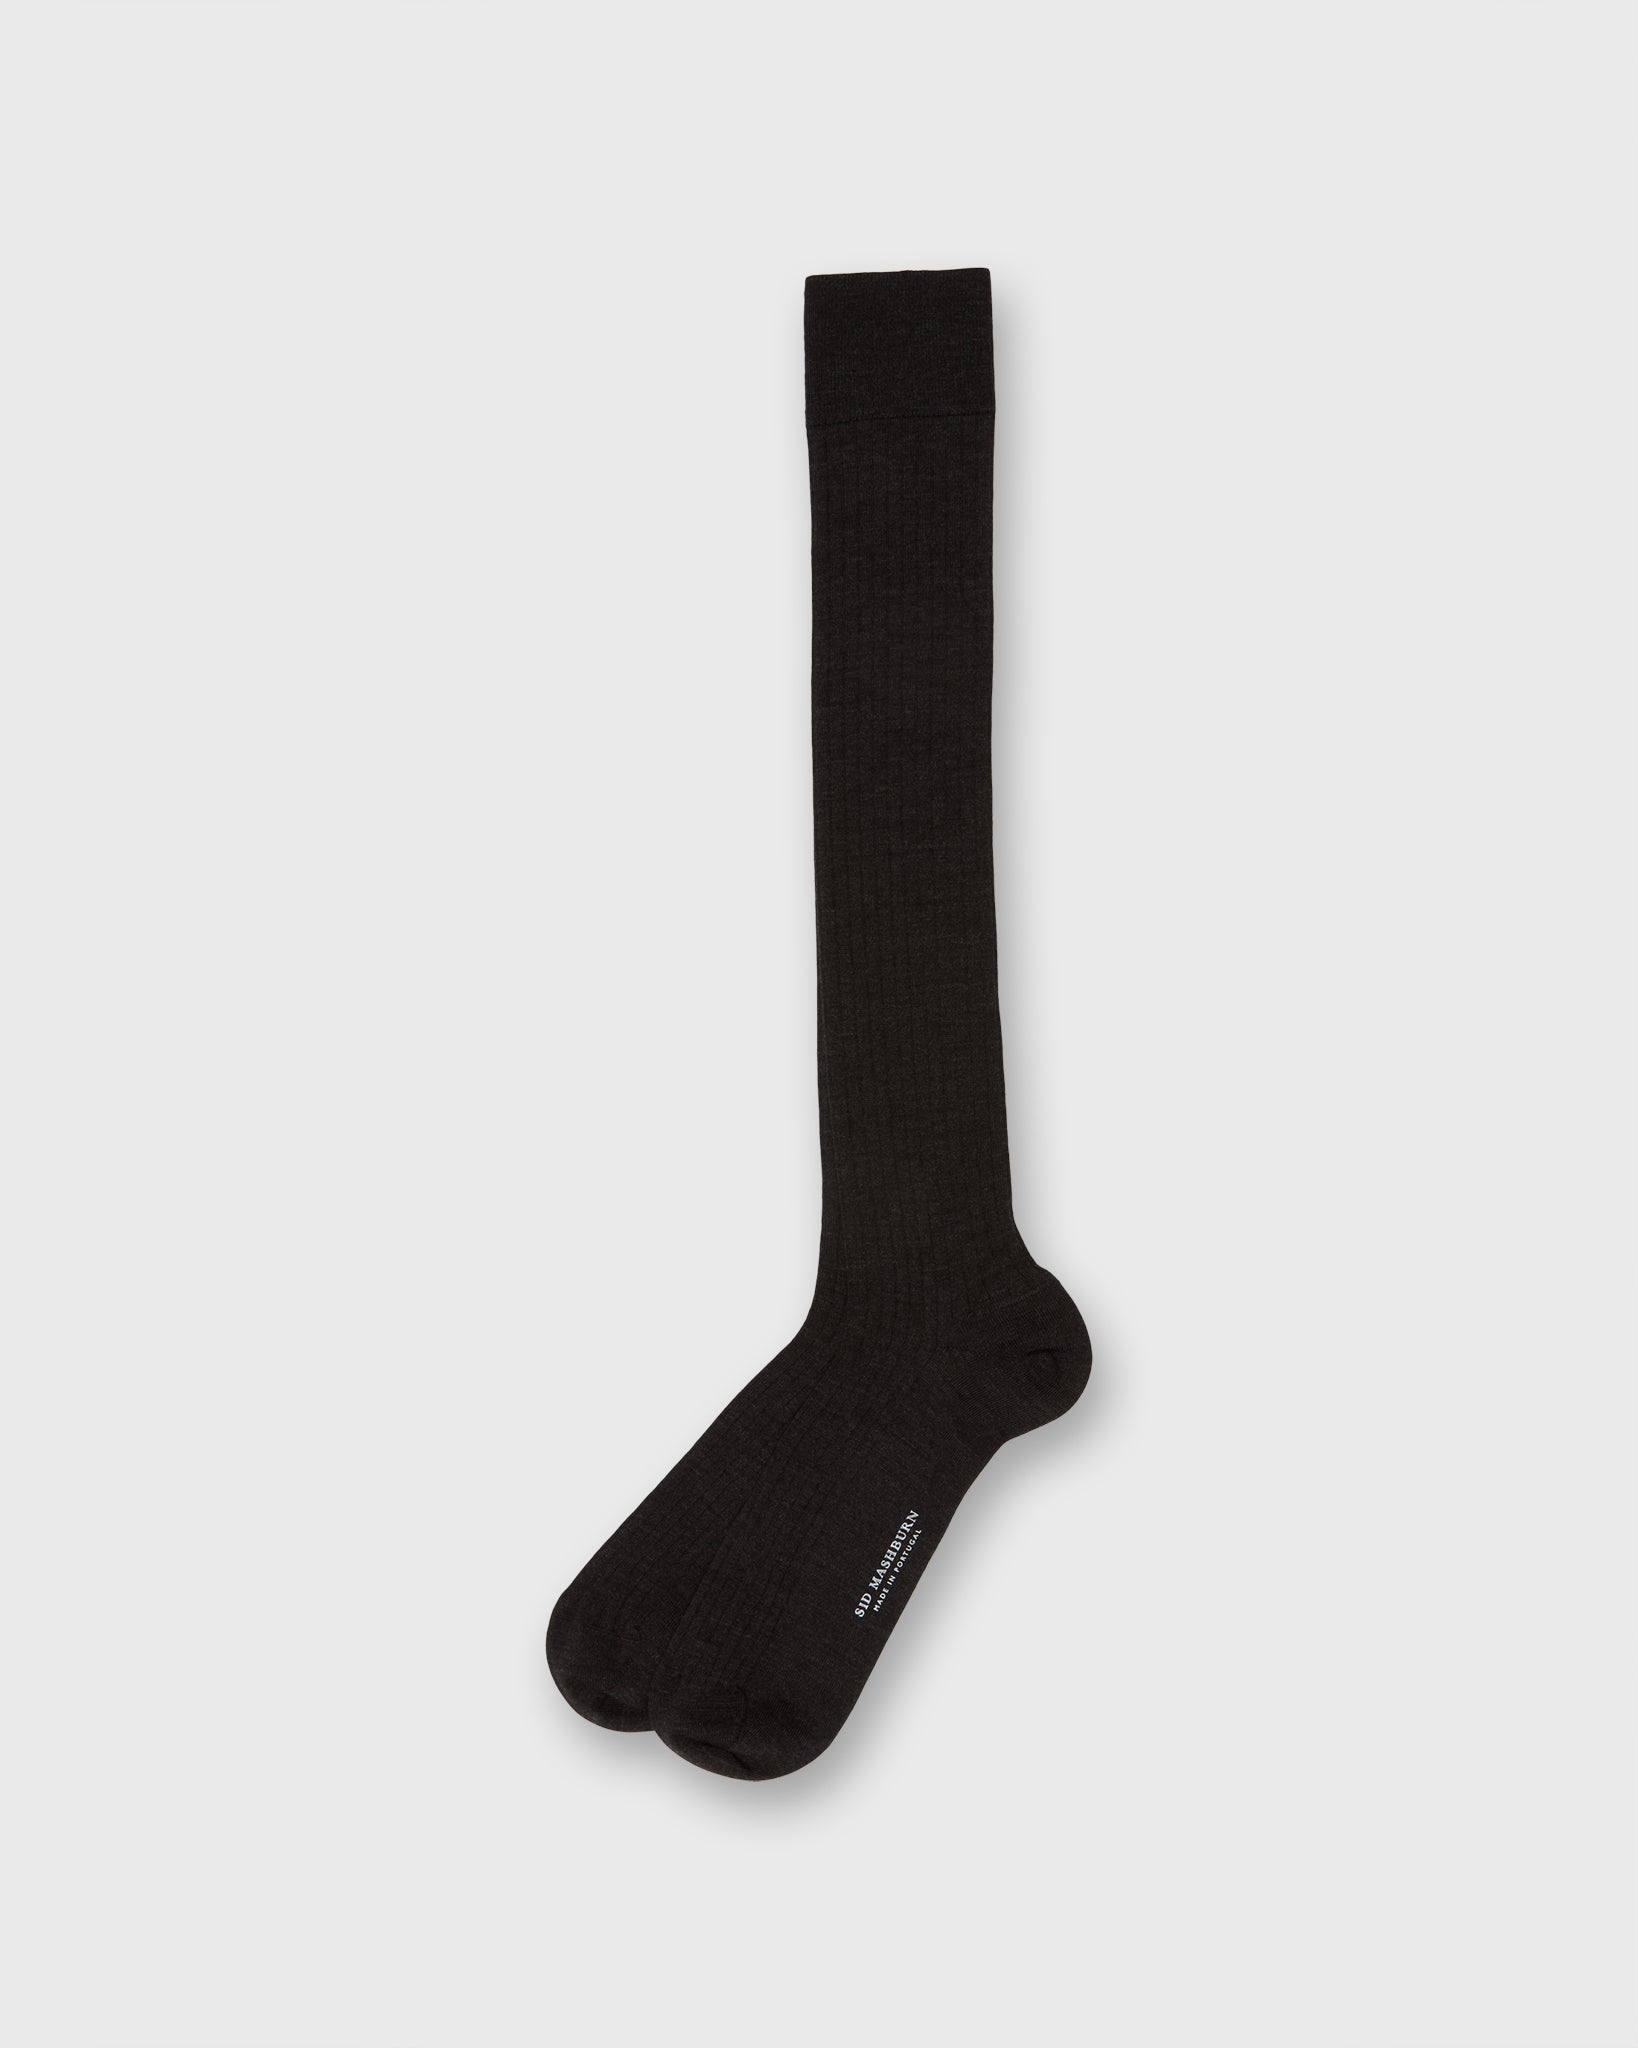 Over-The-Calf Dress Socks in Heather Charcoal Extra Fine Merino